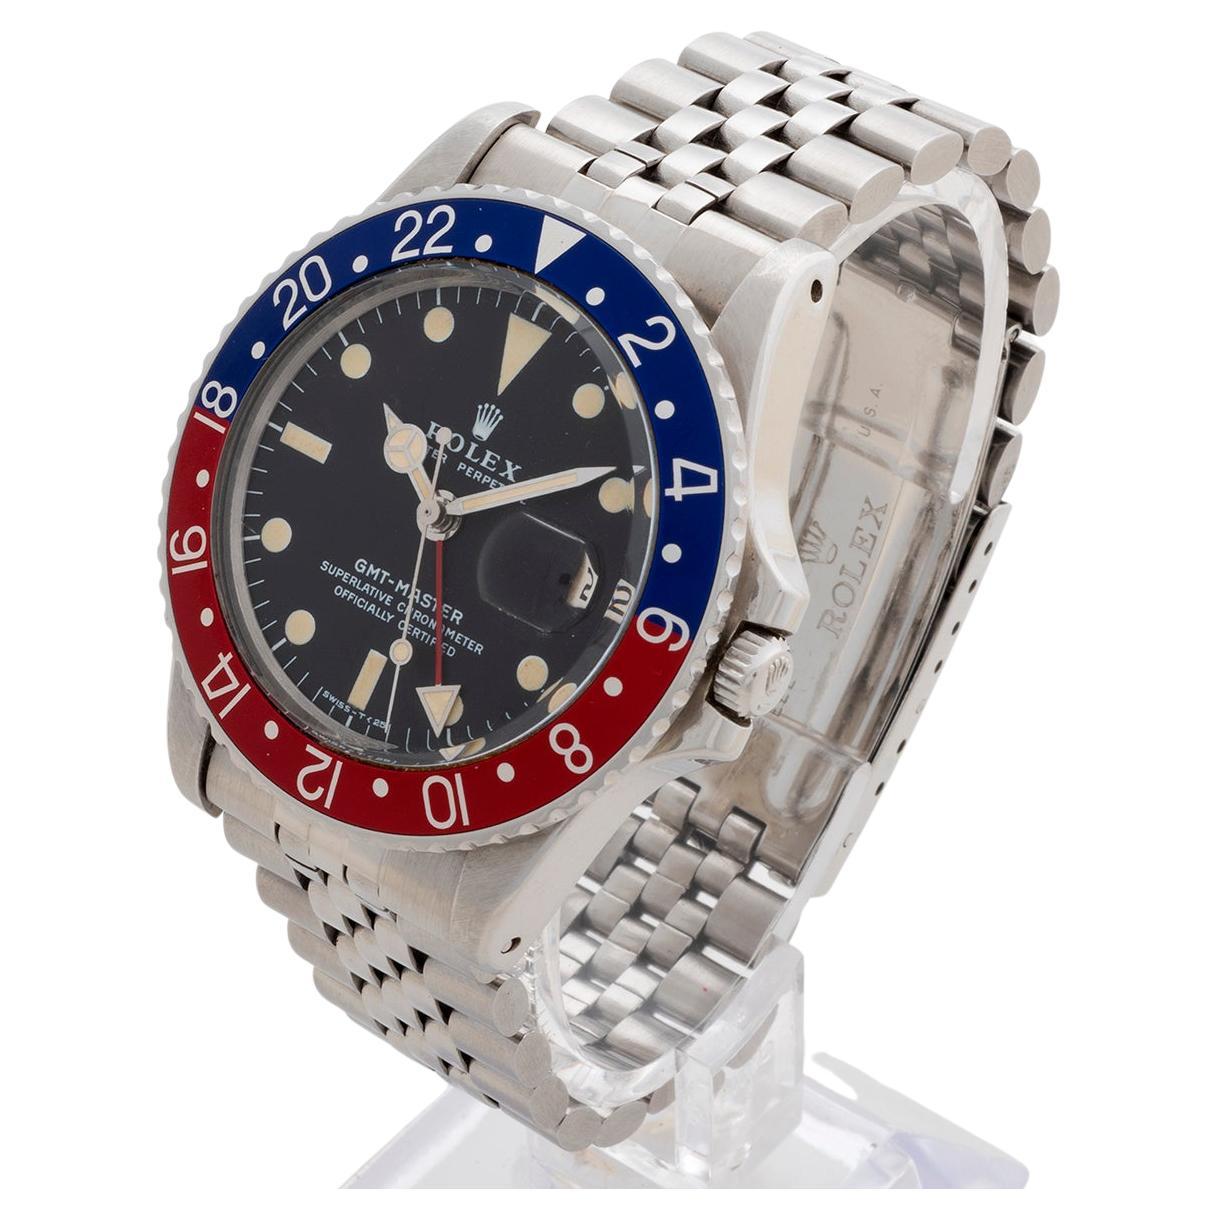 Our rare vintage Rolex GMT Master, reference 1675 , is presented in excellent condition for its age. Featuring a classic combination of pepsi blue and red bezel, stainless steel case and stainless steel jubilee bracelet. The original matching hands